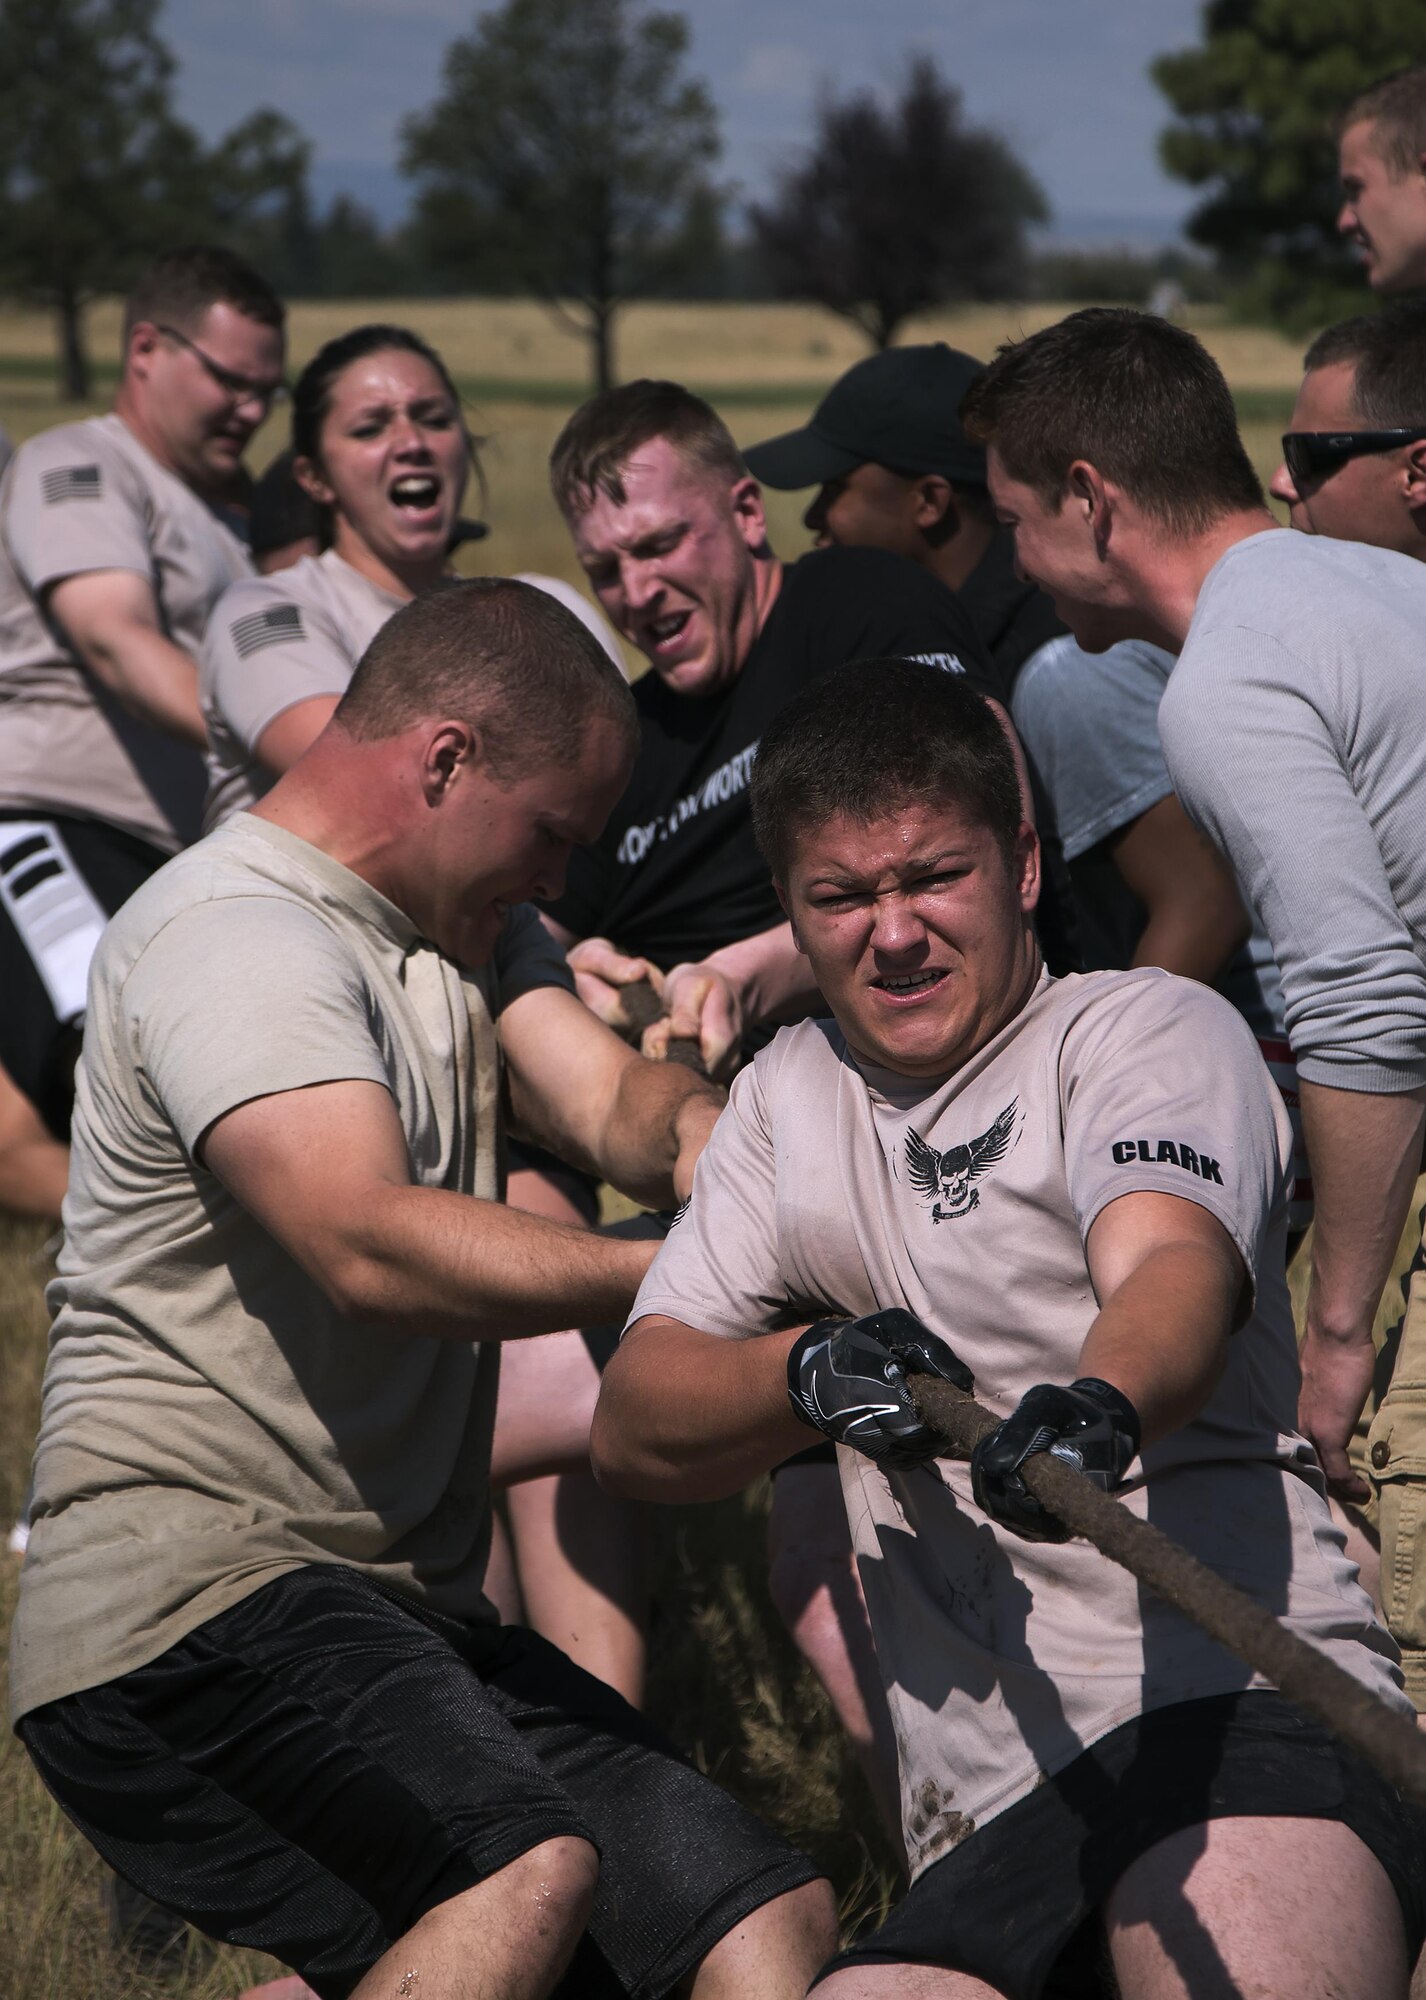 The 790th Missile Security Forces Squadron tug-o-war team struggles to pull their opponents into a mud pit during the annual Frontiercade competition at F.E. Warren Air Force Base, Wyo., Aug. 19, 2016. The 790th MSFS team came in second place at the event, losing to the 90th Security Support Squadron. (U.S. Air Force photo by Senior Airman Brandon Valle)